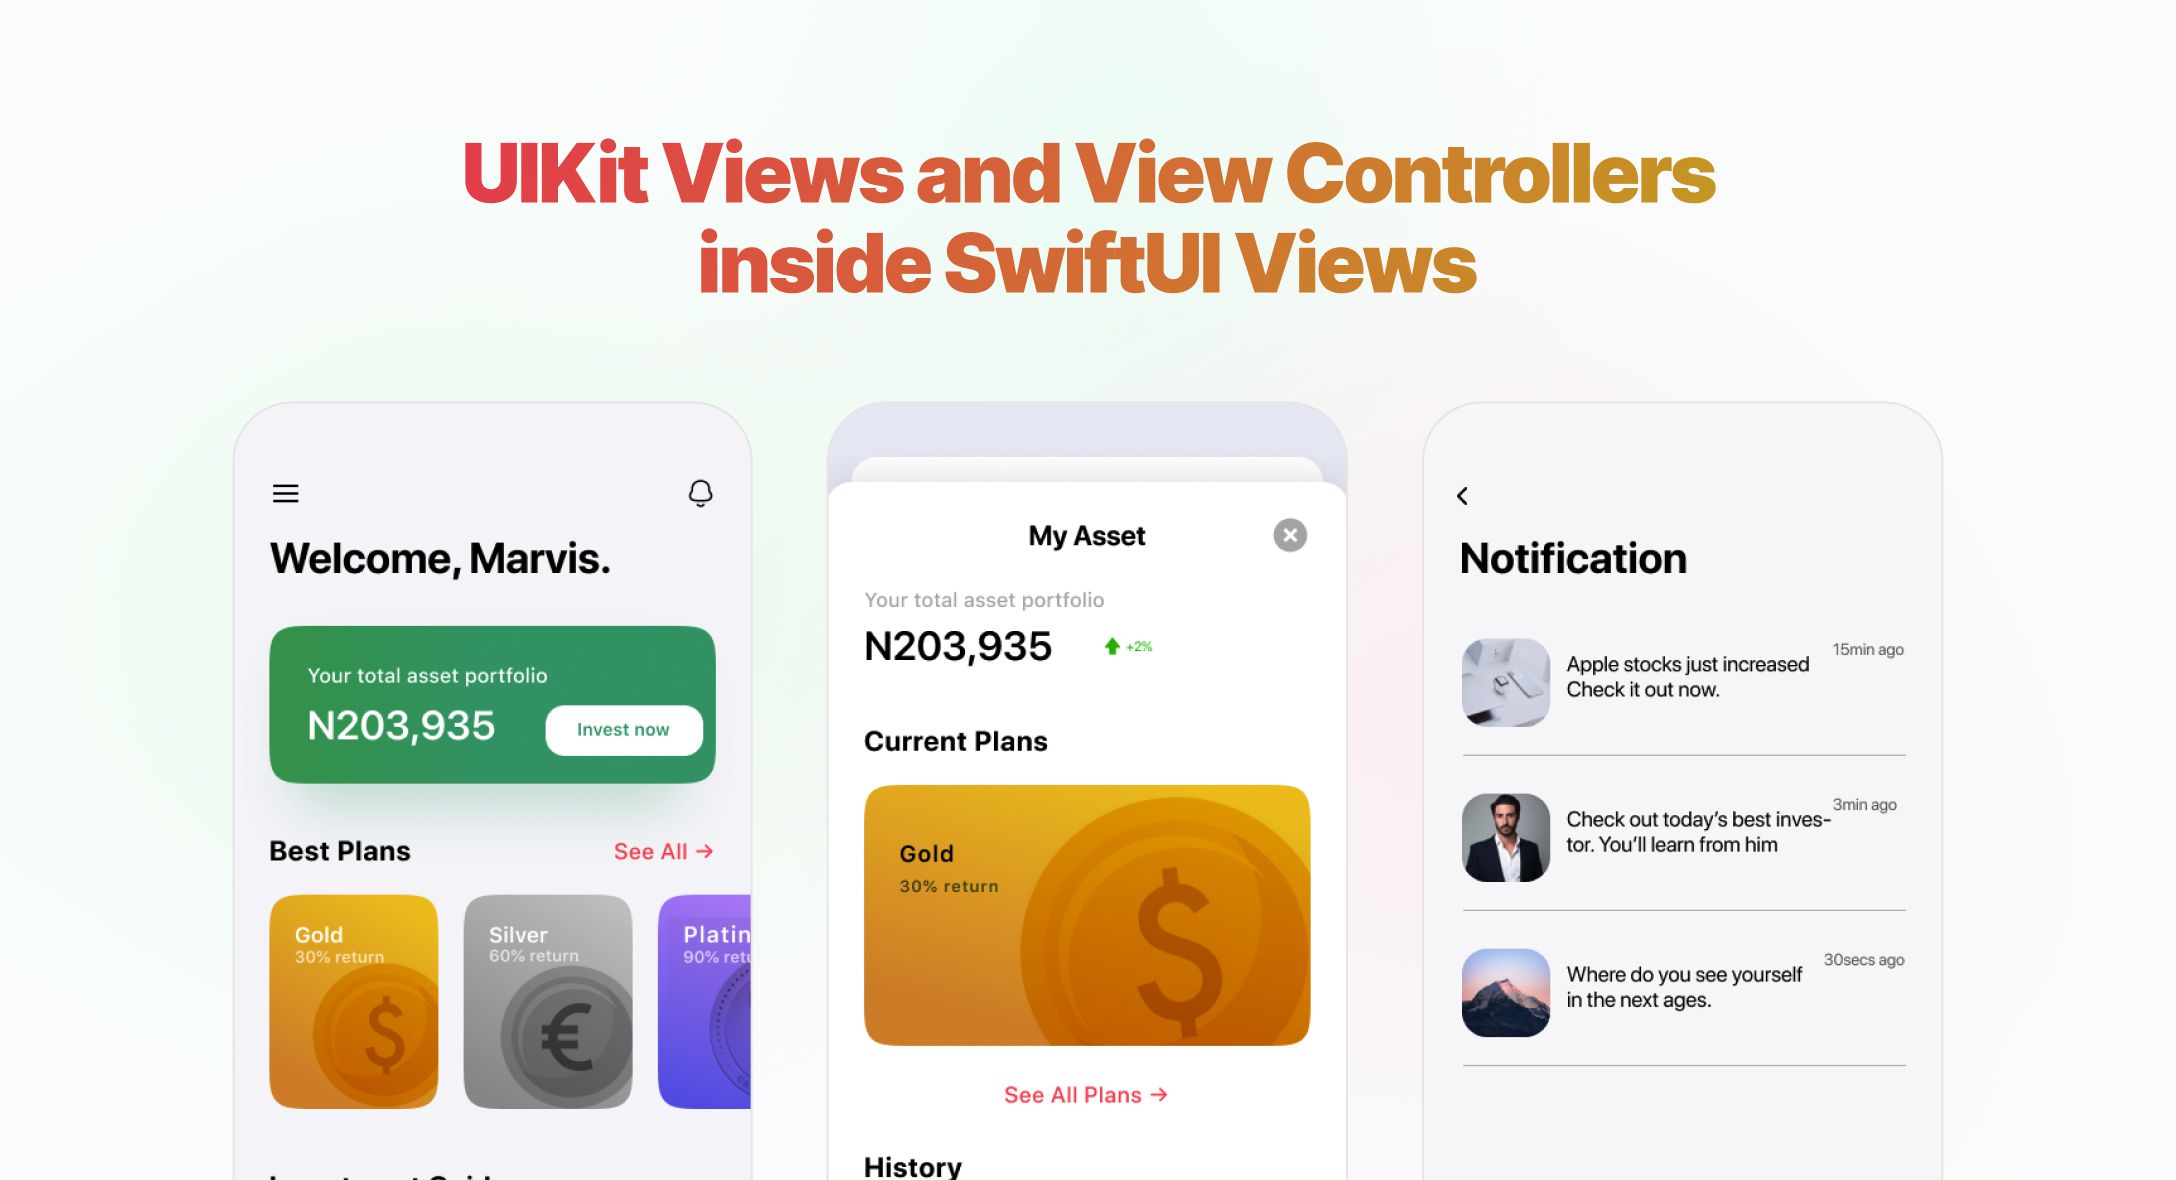 How to use UIKit Views and View Controllers inside SwiftUI Views